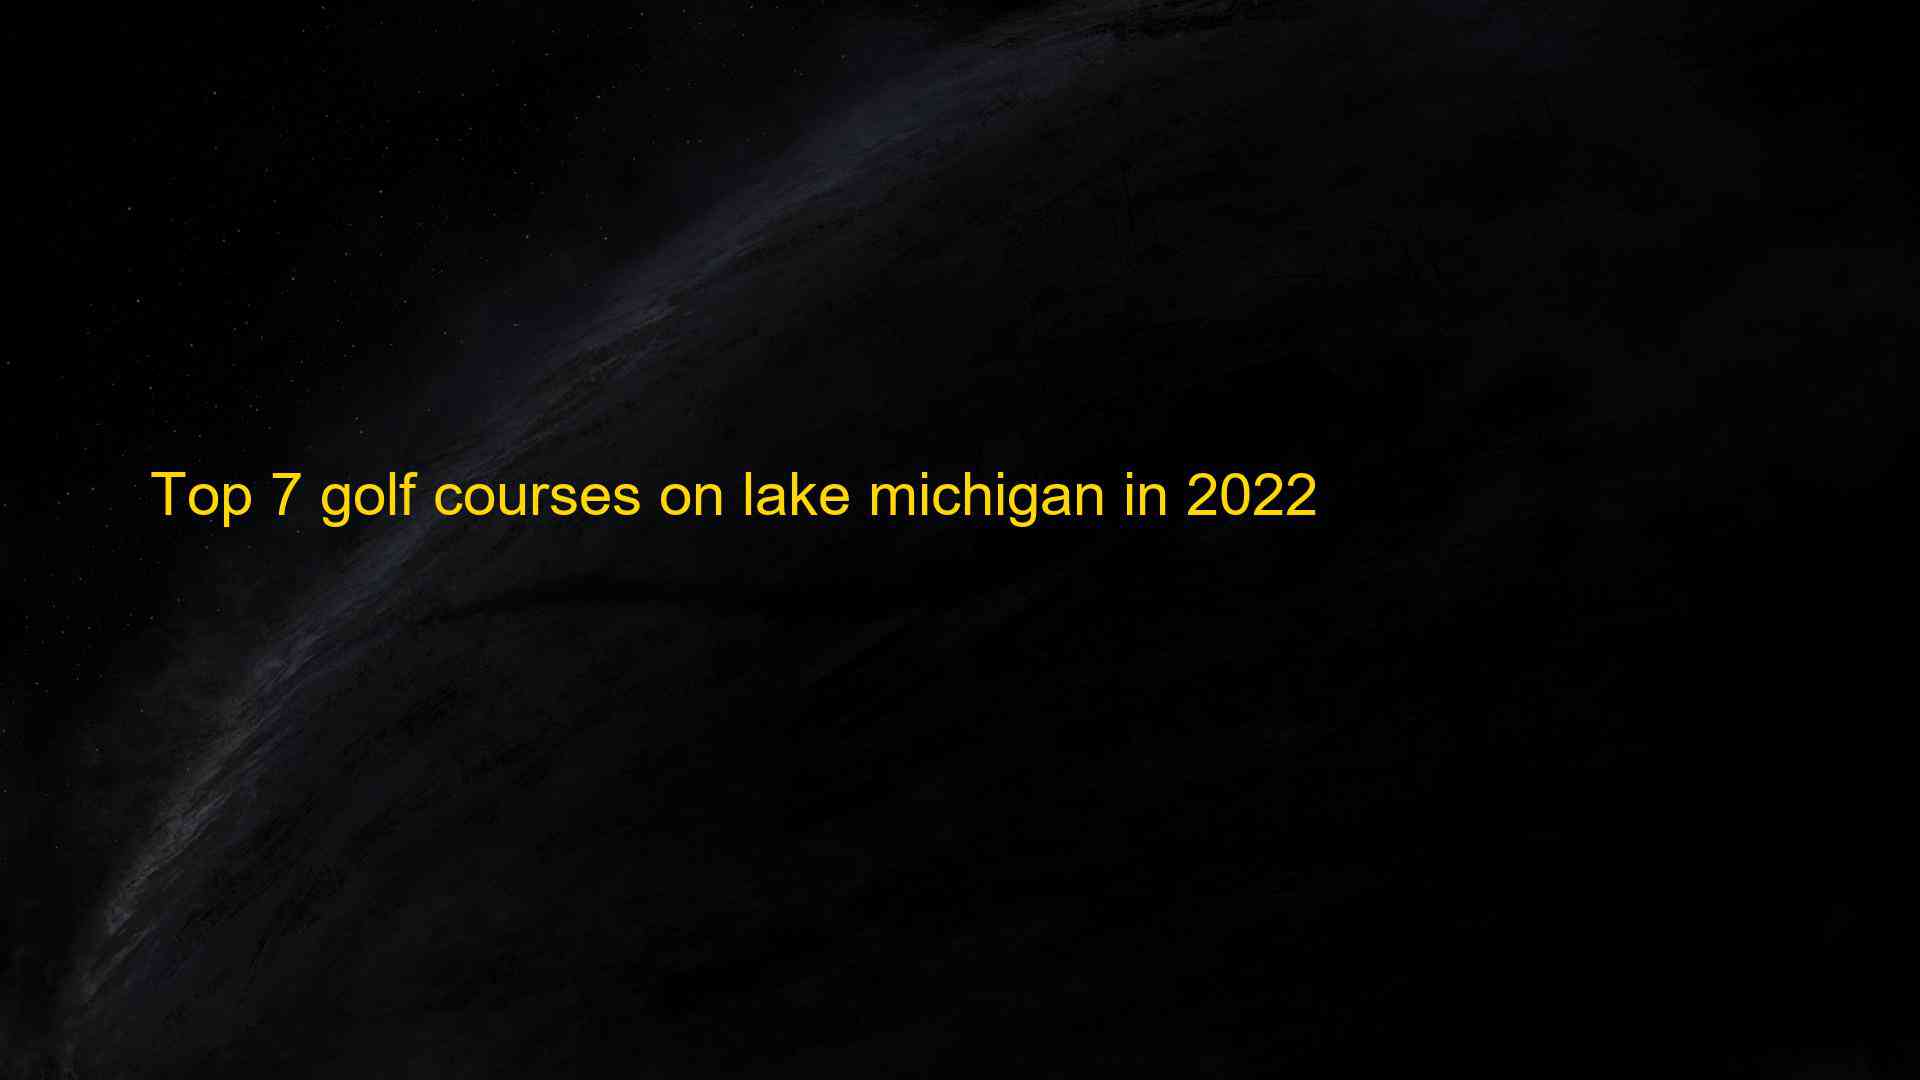 Top 7 golf courses on lake michigan in 2022 1660965553